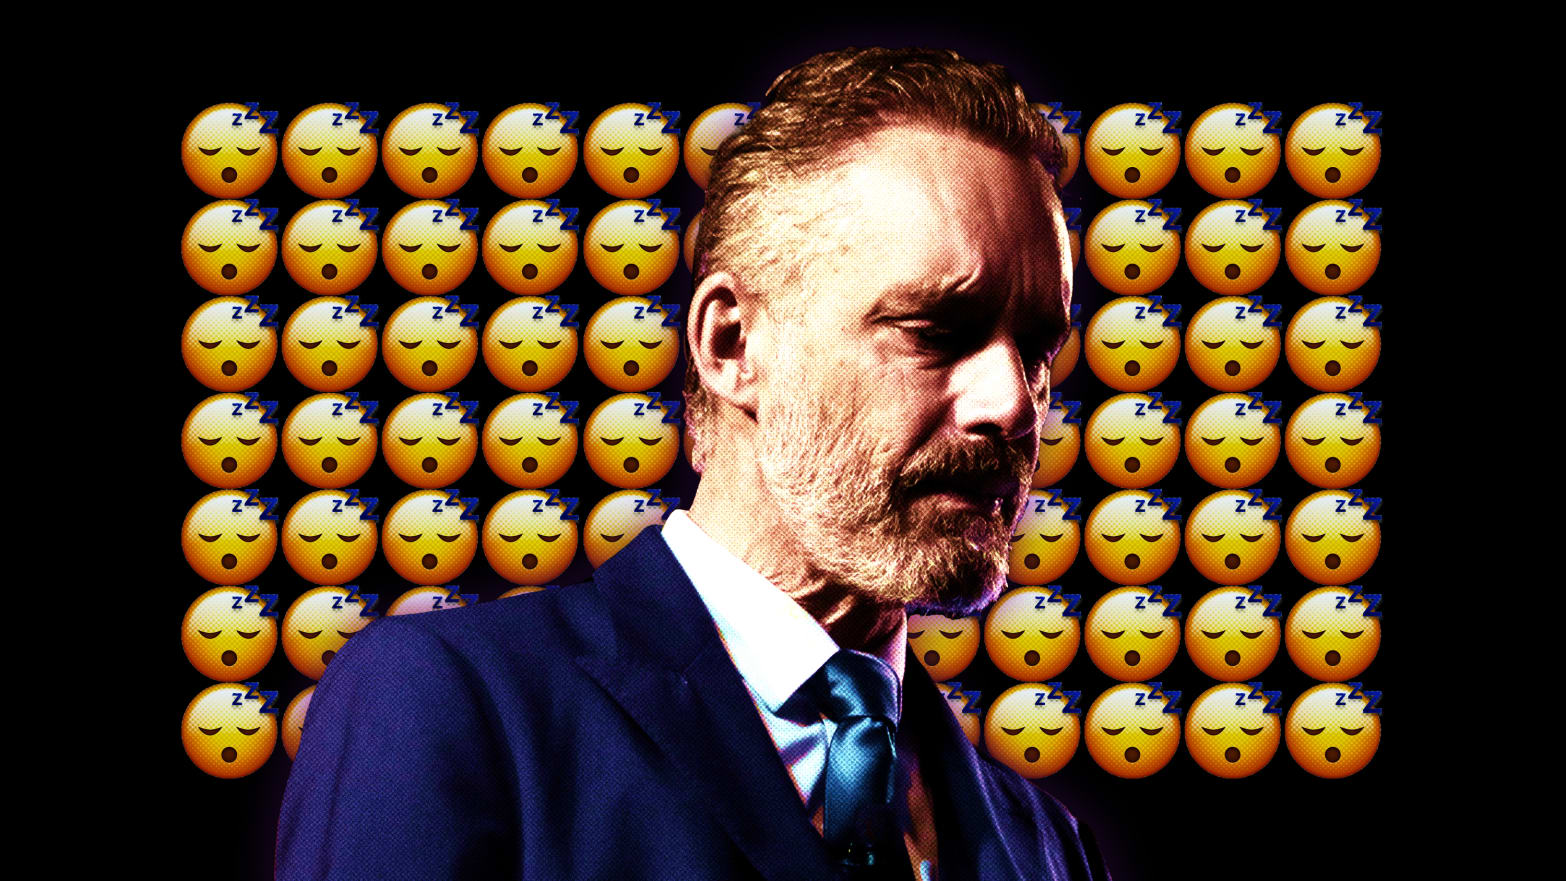 uhyre fisk sum Jordan Peterson's Downfall Is How Boring He's Become